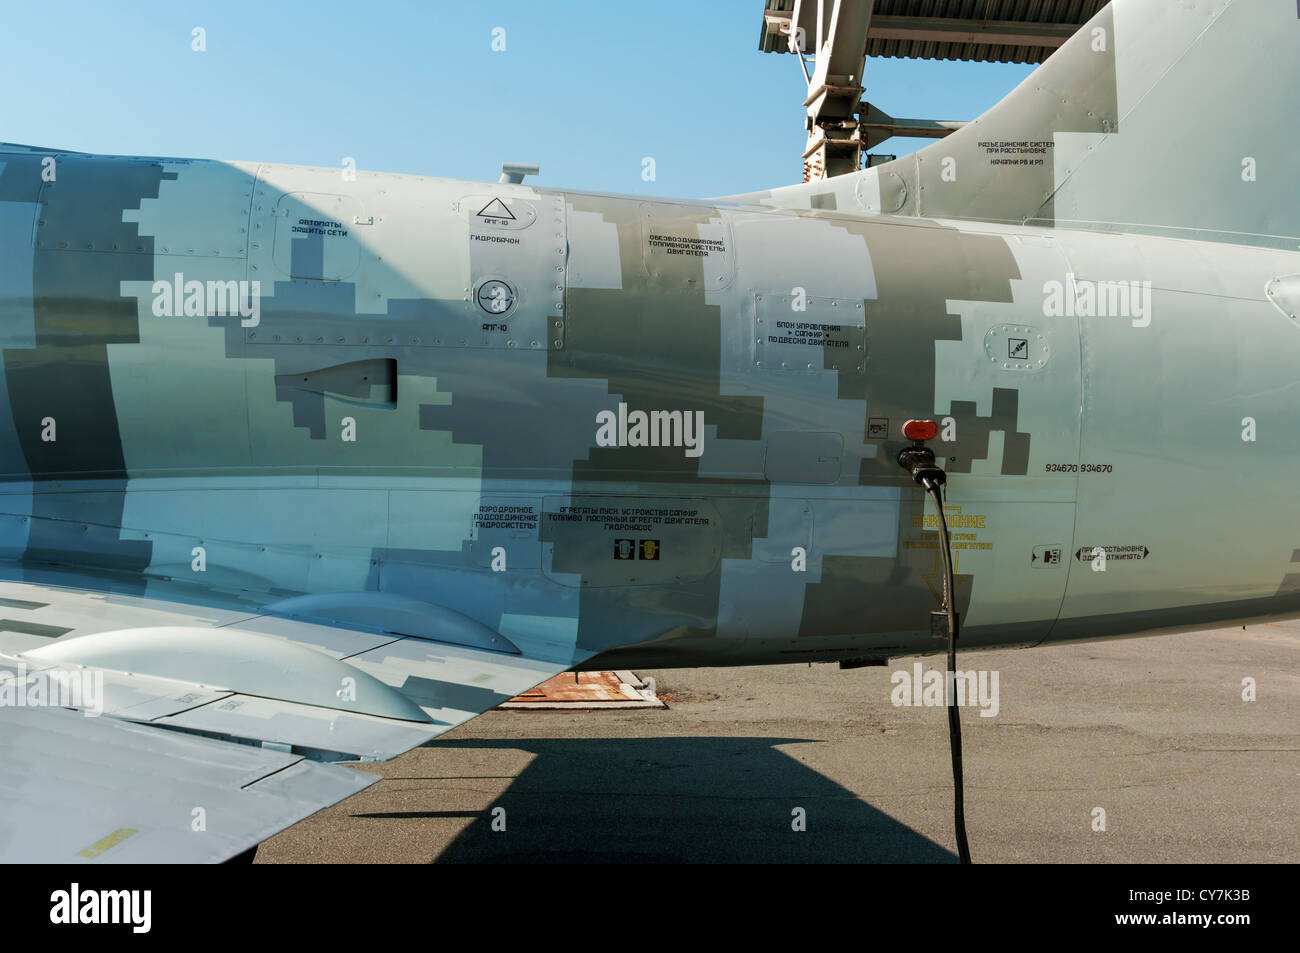 Digital 'pixel' camouflage and stencils on the airplane L-39M1. Stock Photo